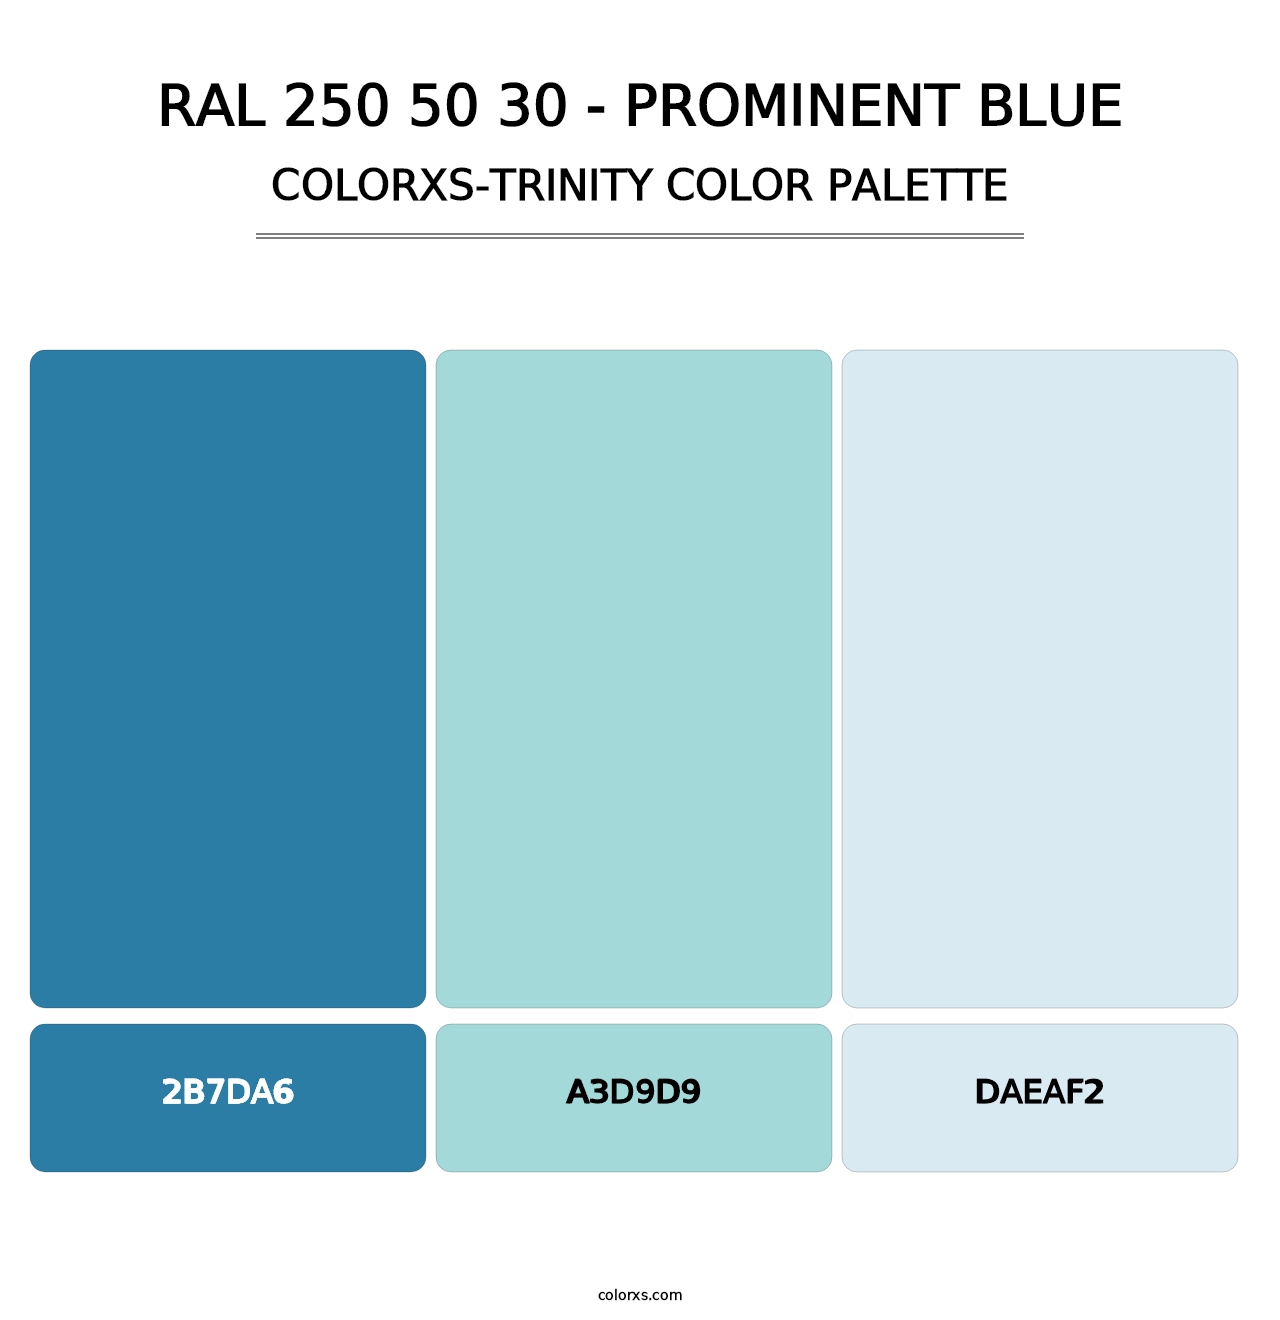 RAL 250 50 30 - Prominent Blue - Colorxs Trinity Palette